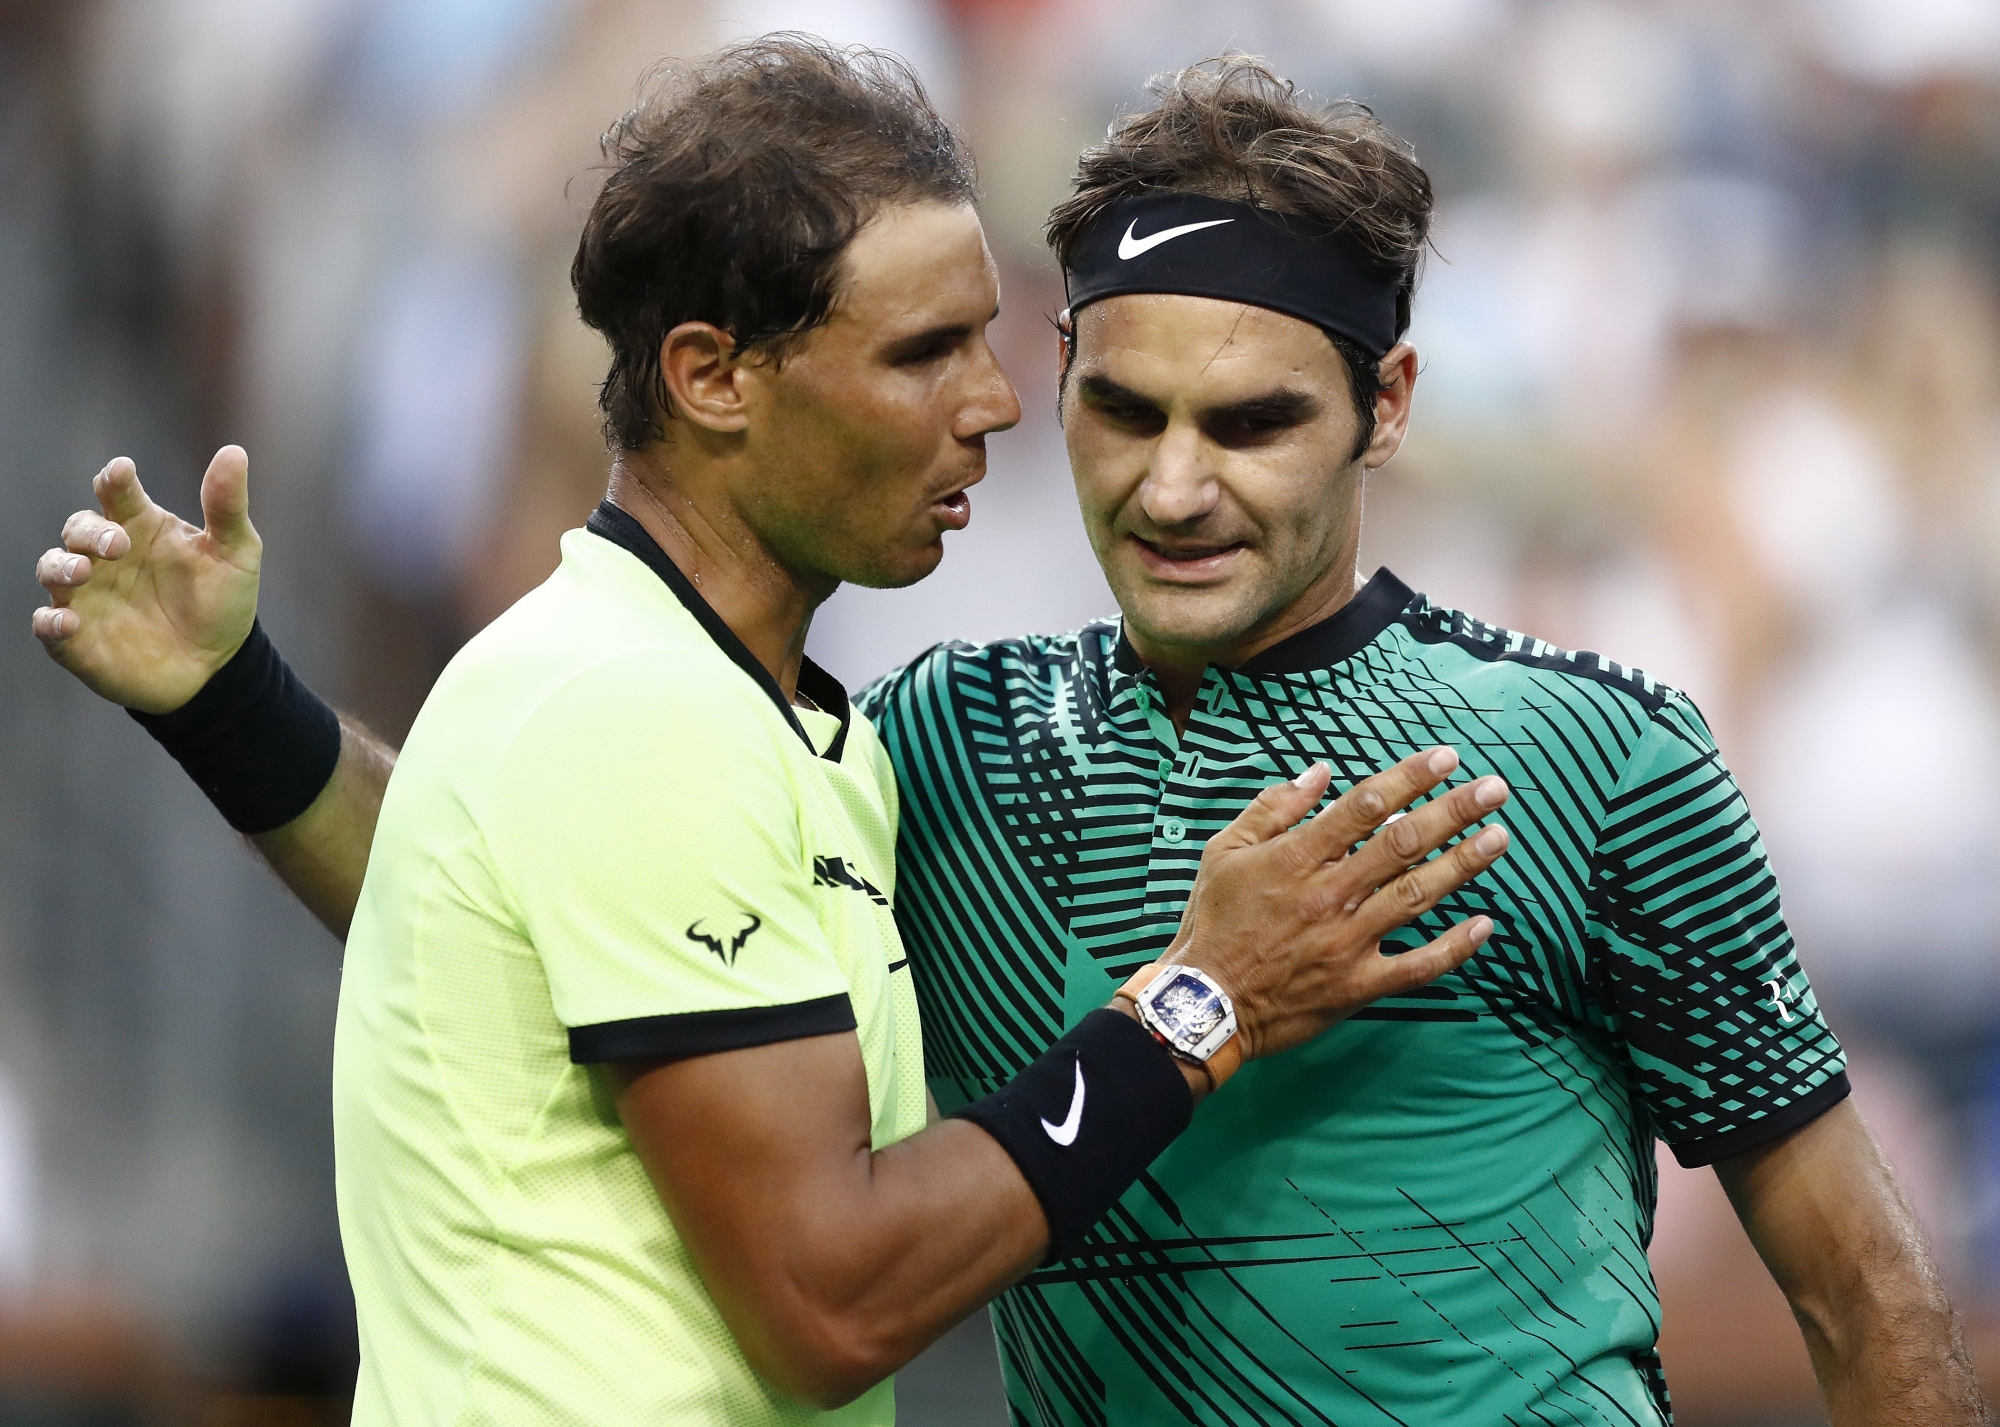 epa05851105 Roger Federer of Switzerland (R) hugs Rafael Nadal of Spain (L) after his win in their match at the 2017 BNP Paribas Open tennis tournament at the Indian Wells Tennis Garden in Indian Wells, California, USA, 15 March 2017.  EPA/LARRY W. SMITH